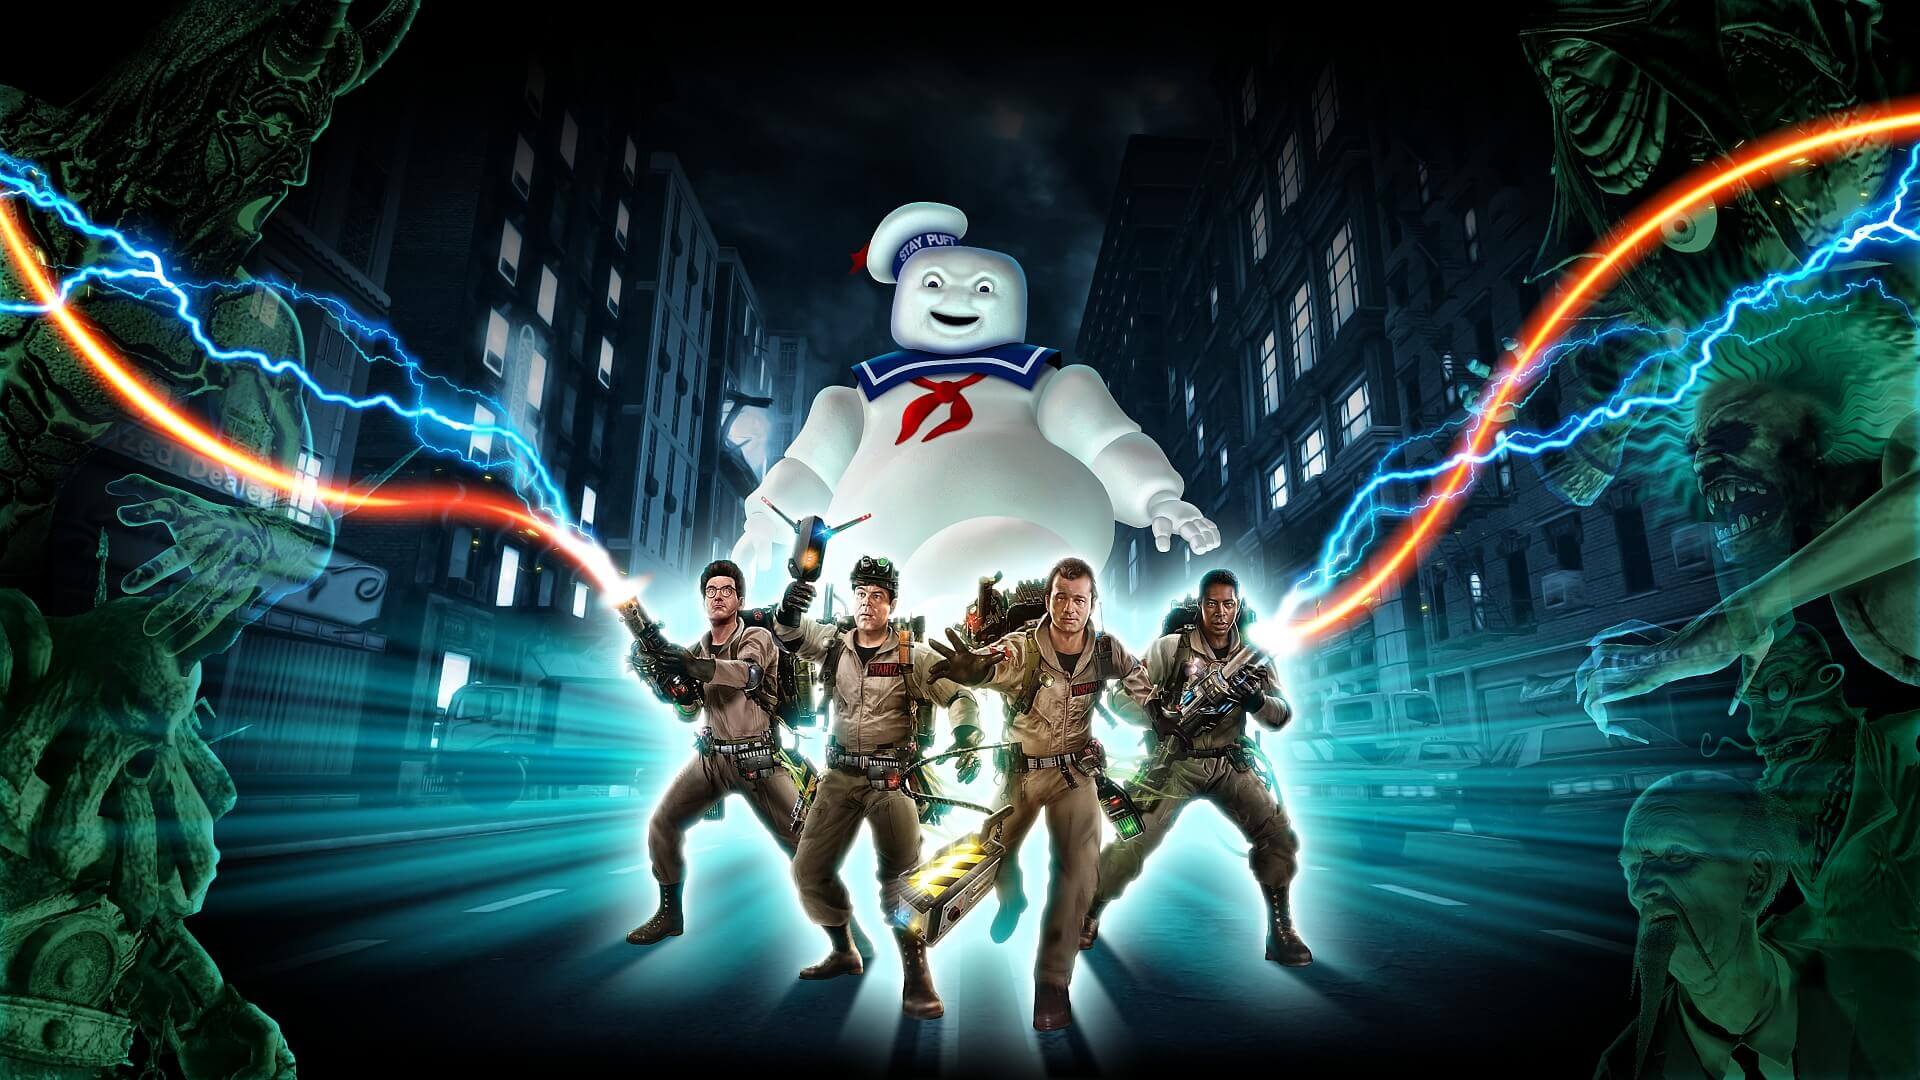 Image for New Ghostbusters game on the way says Ghostbuster Ernie Hudson